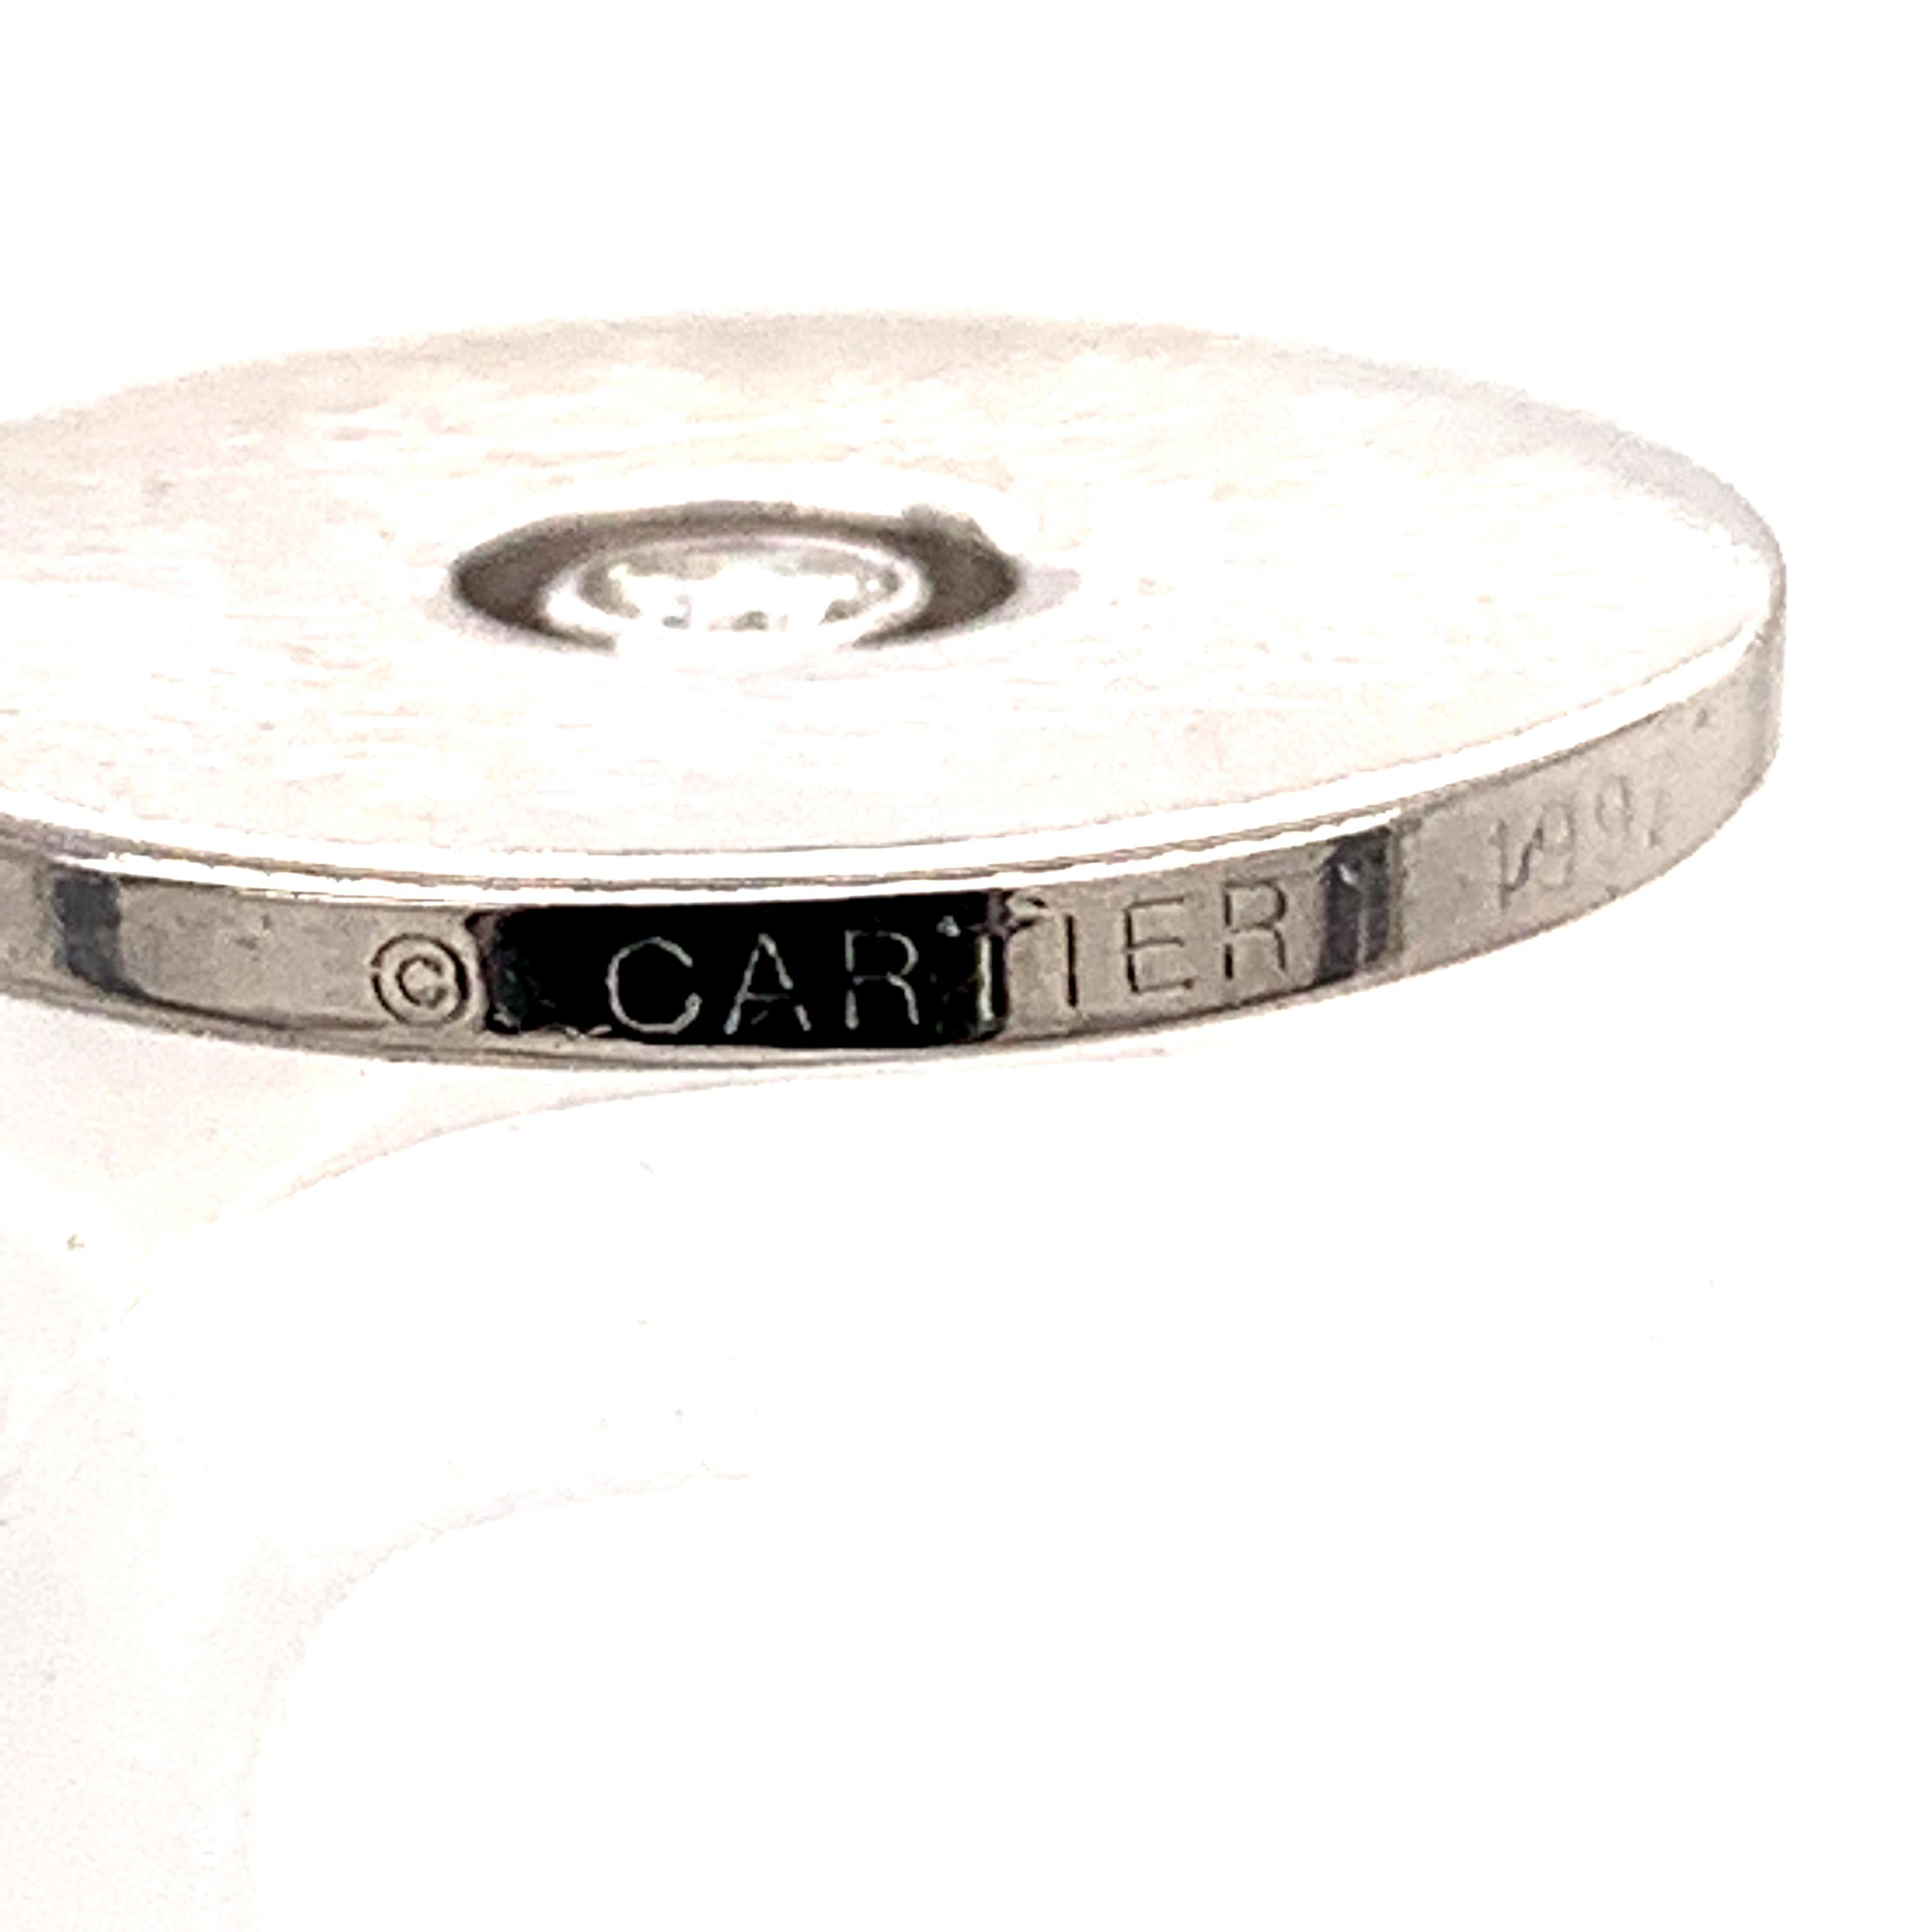 Sleek, modern pendant/charm.  Made, signed and numbered by CARTIER.  18K white gold, with a bezel-set center diamond.  2/3